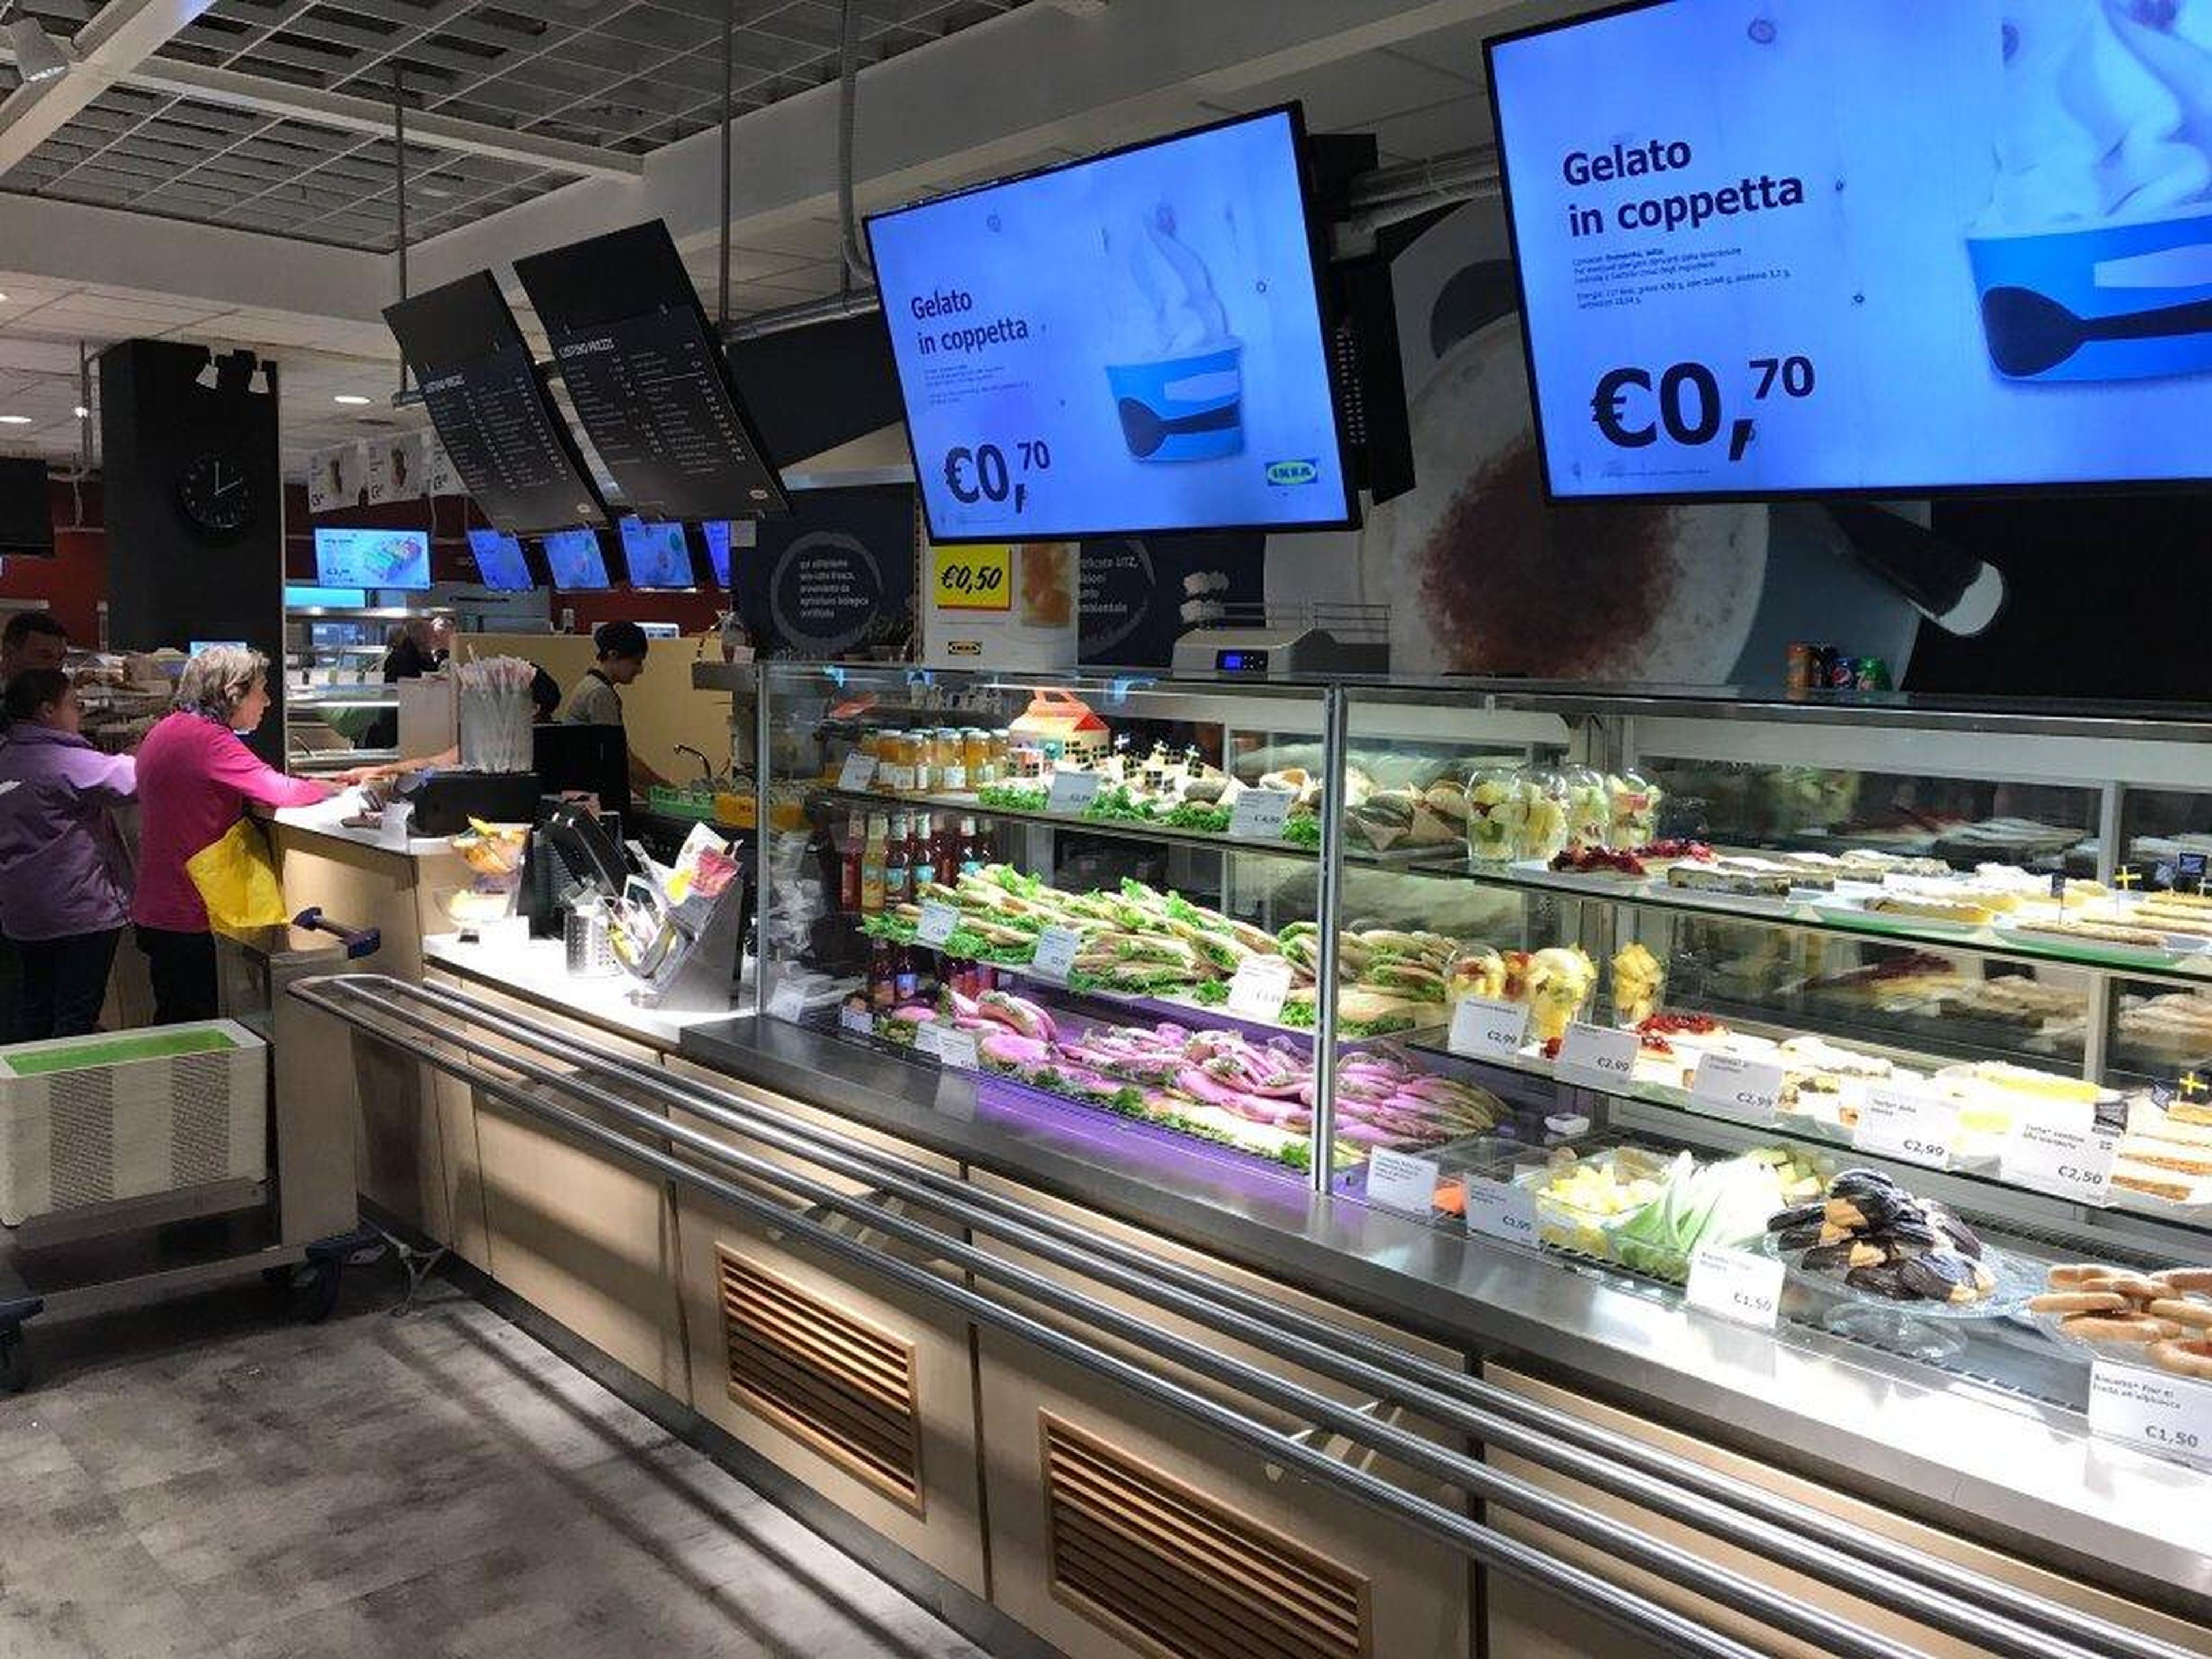 This Italian IKEA in Genoa offers Gelato for its customers ...